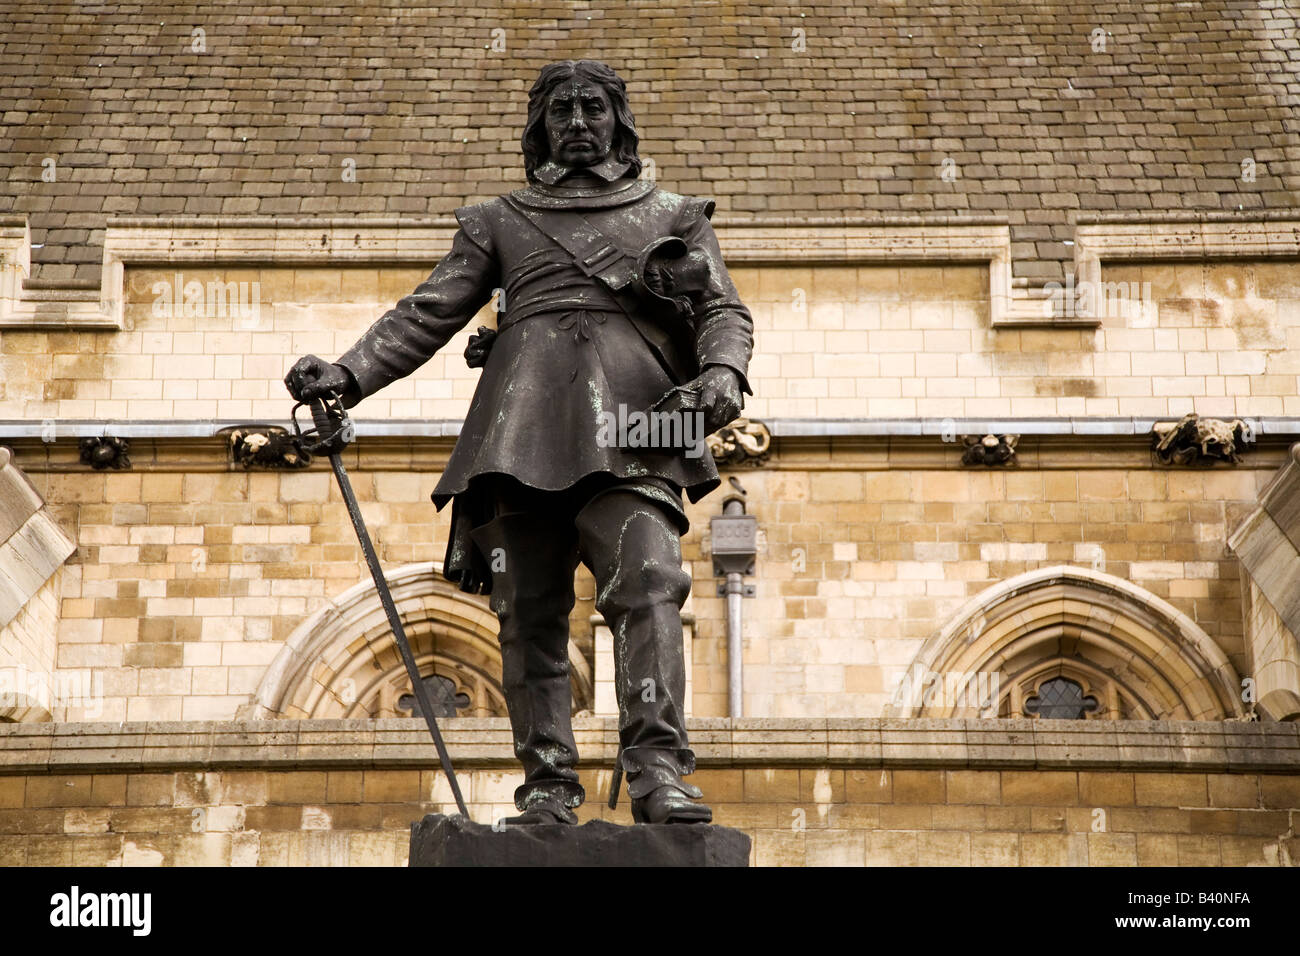 The statue of Oliver Cromwell (1599- 1658) that stands outside of the Houses of Parliament in Westminster, England. Stock Photo